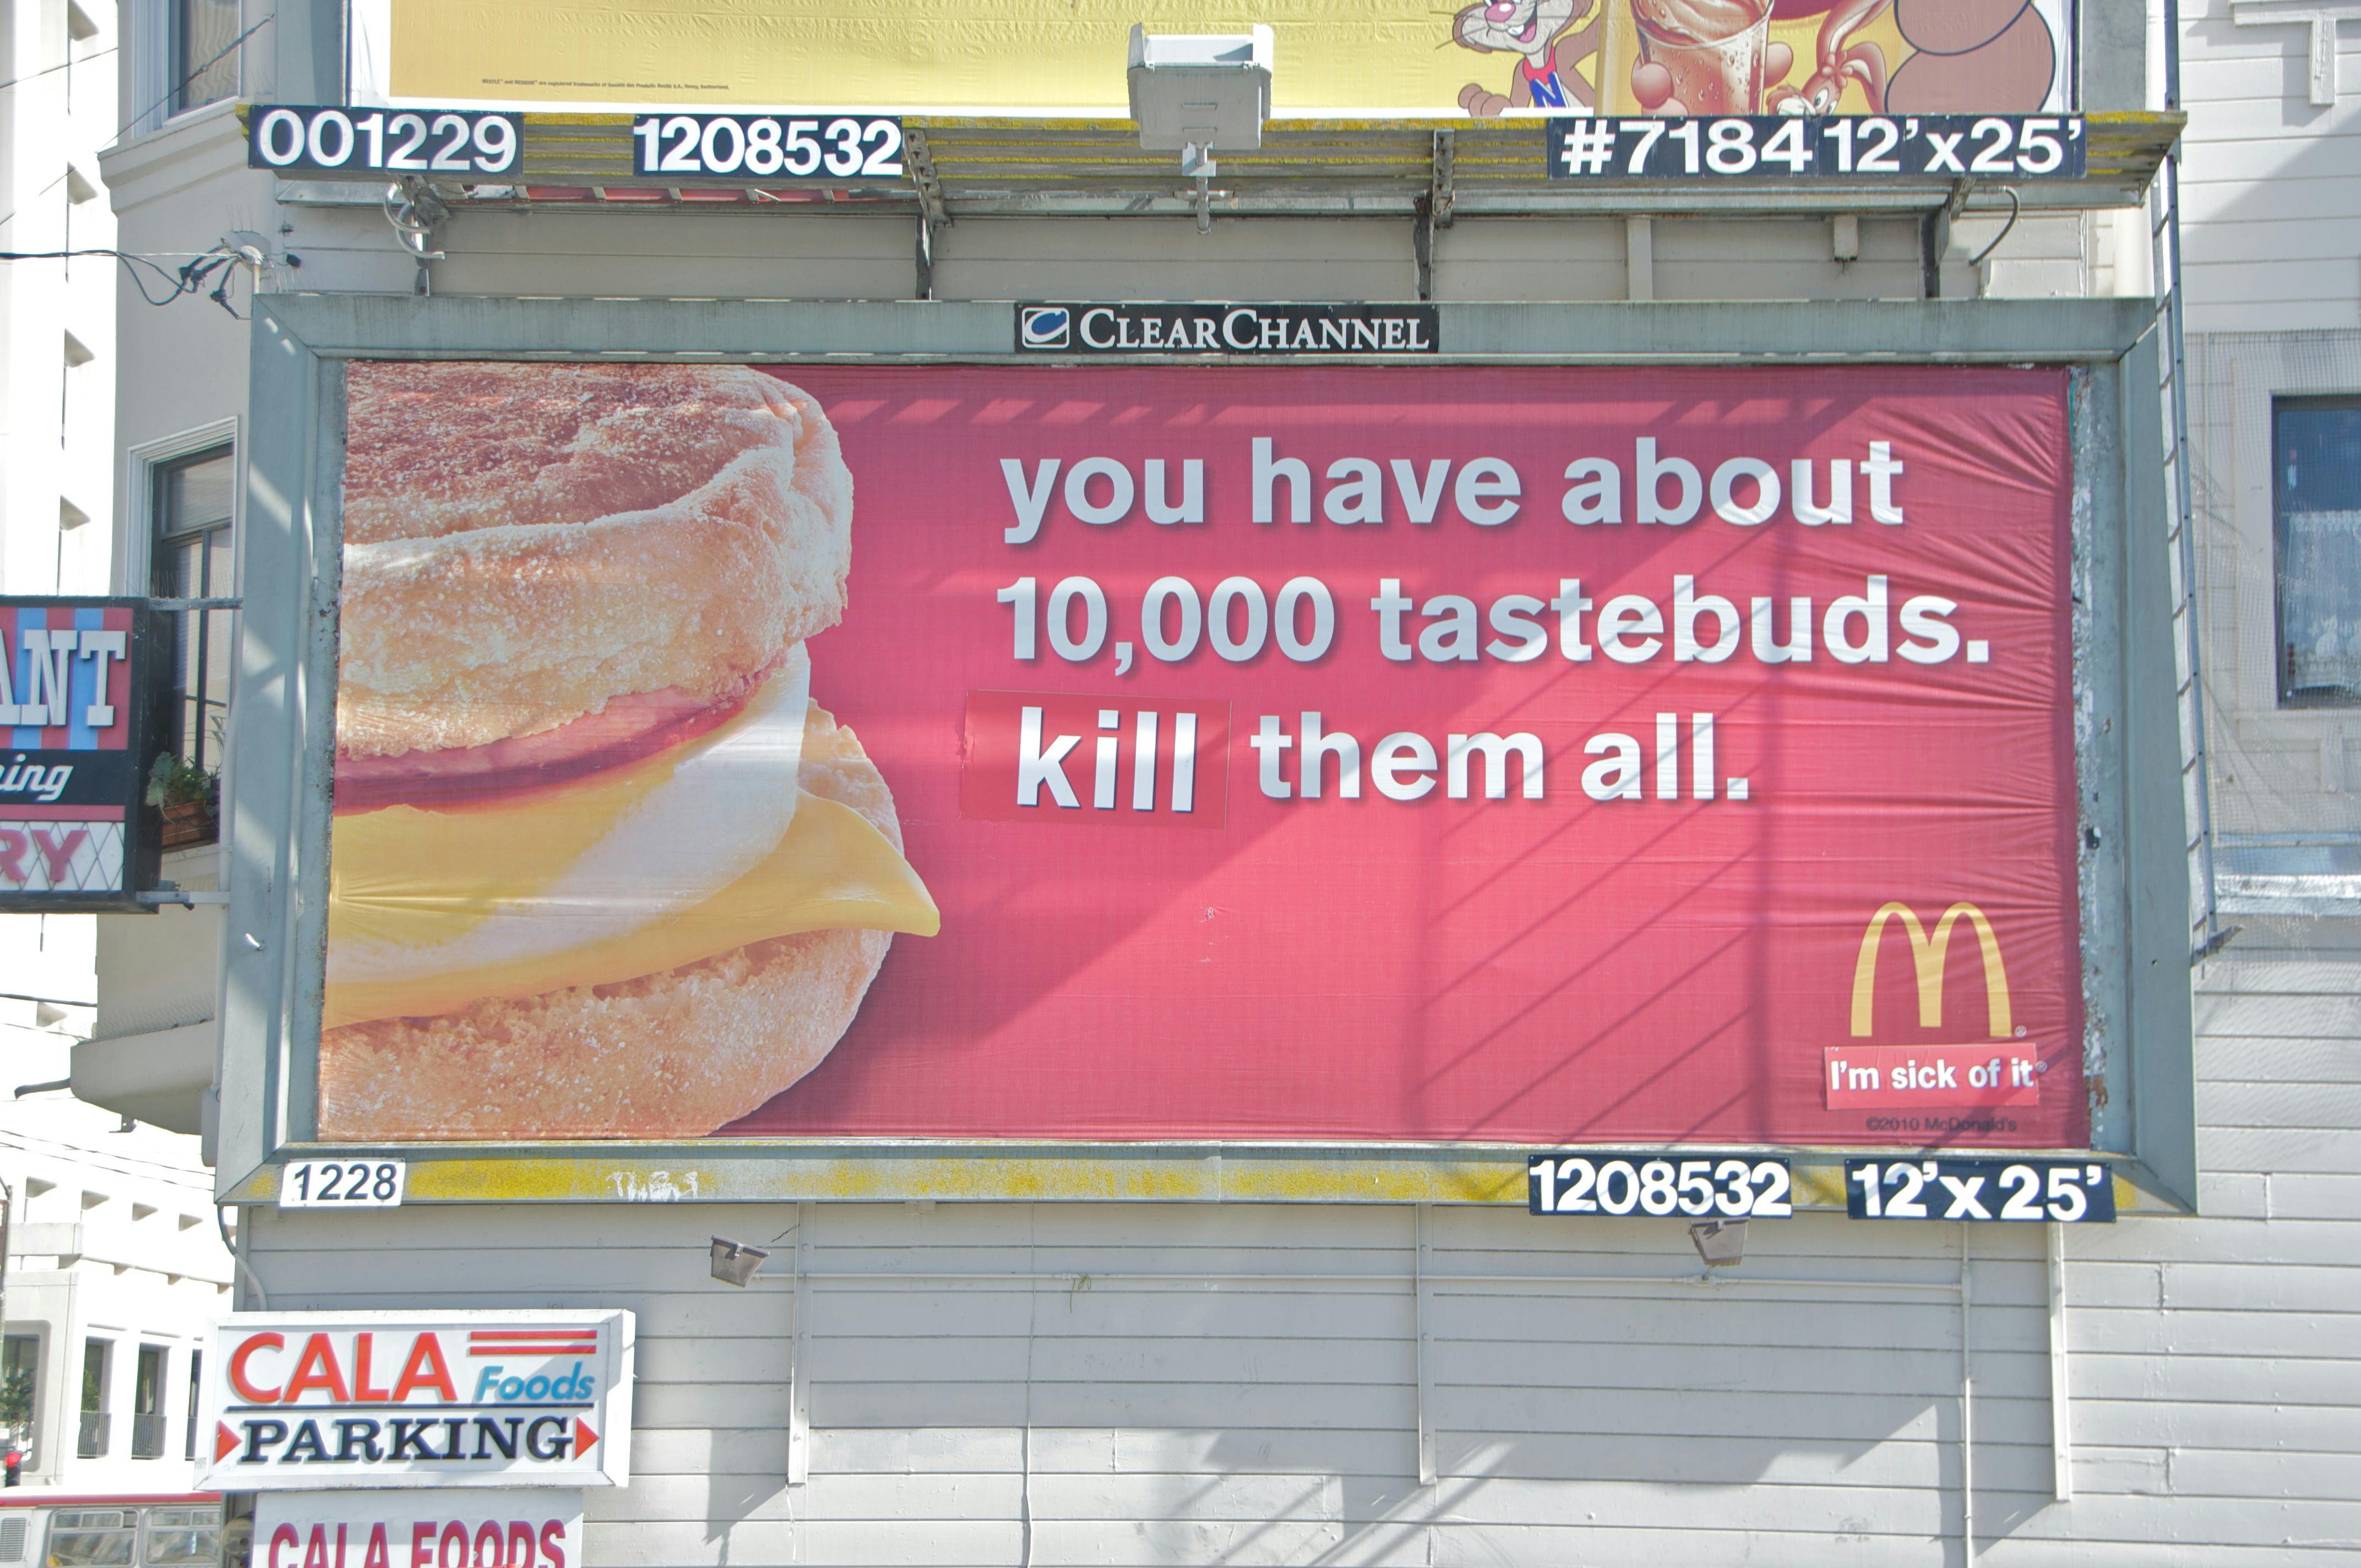 Photograph of Billboard Liberation Front McDonald's billboard, "you have about 10,000 tastebuds. kill them all."